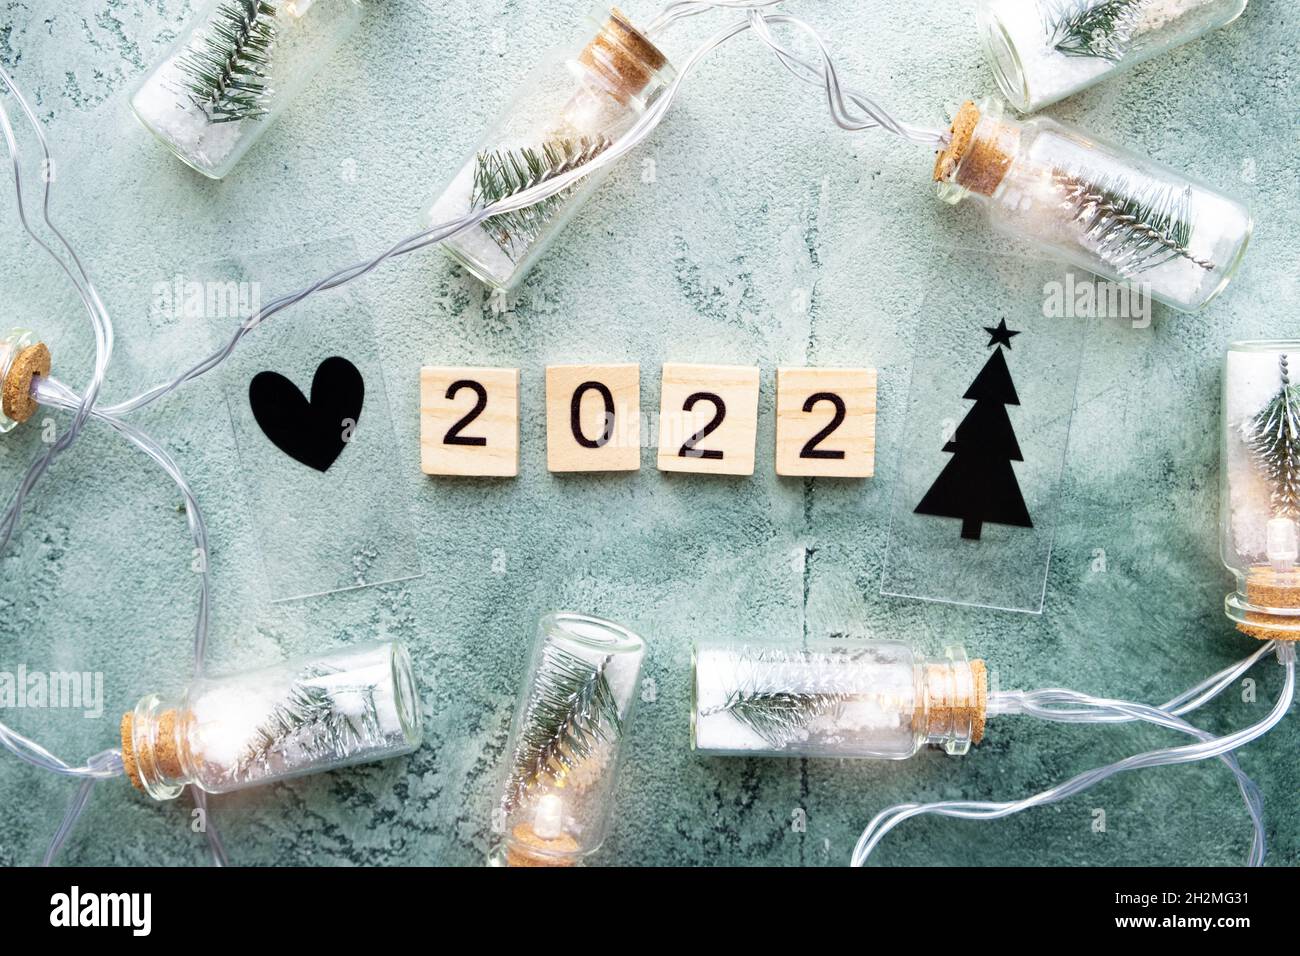 Number 2022 and a glowing garland of glass jars with Christmas trees and snow inside on a textured green background. New year and christmas concept Stock Photo